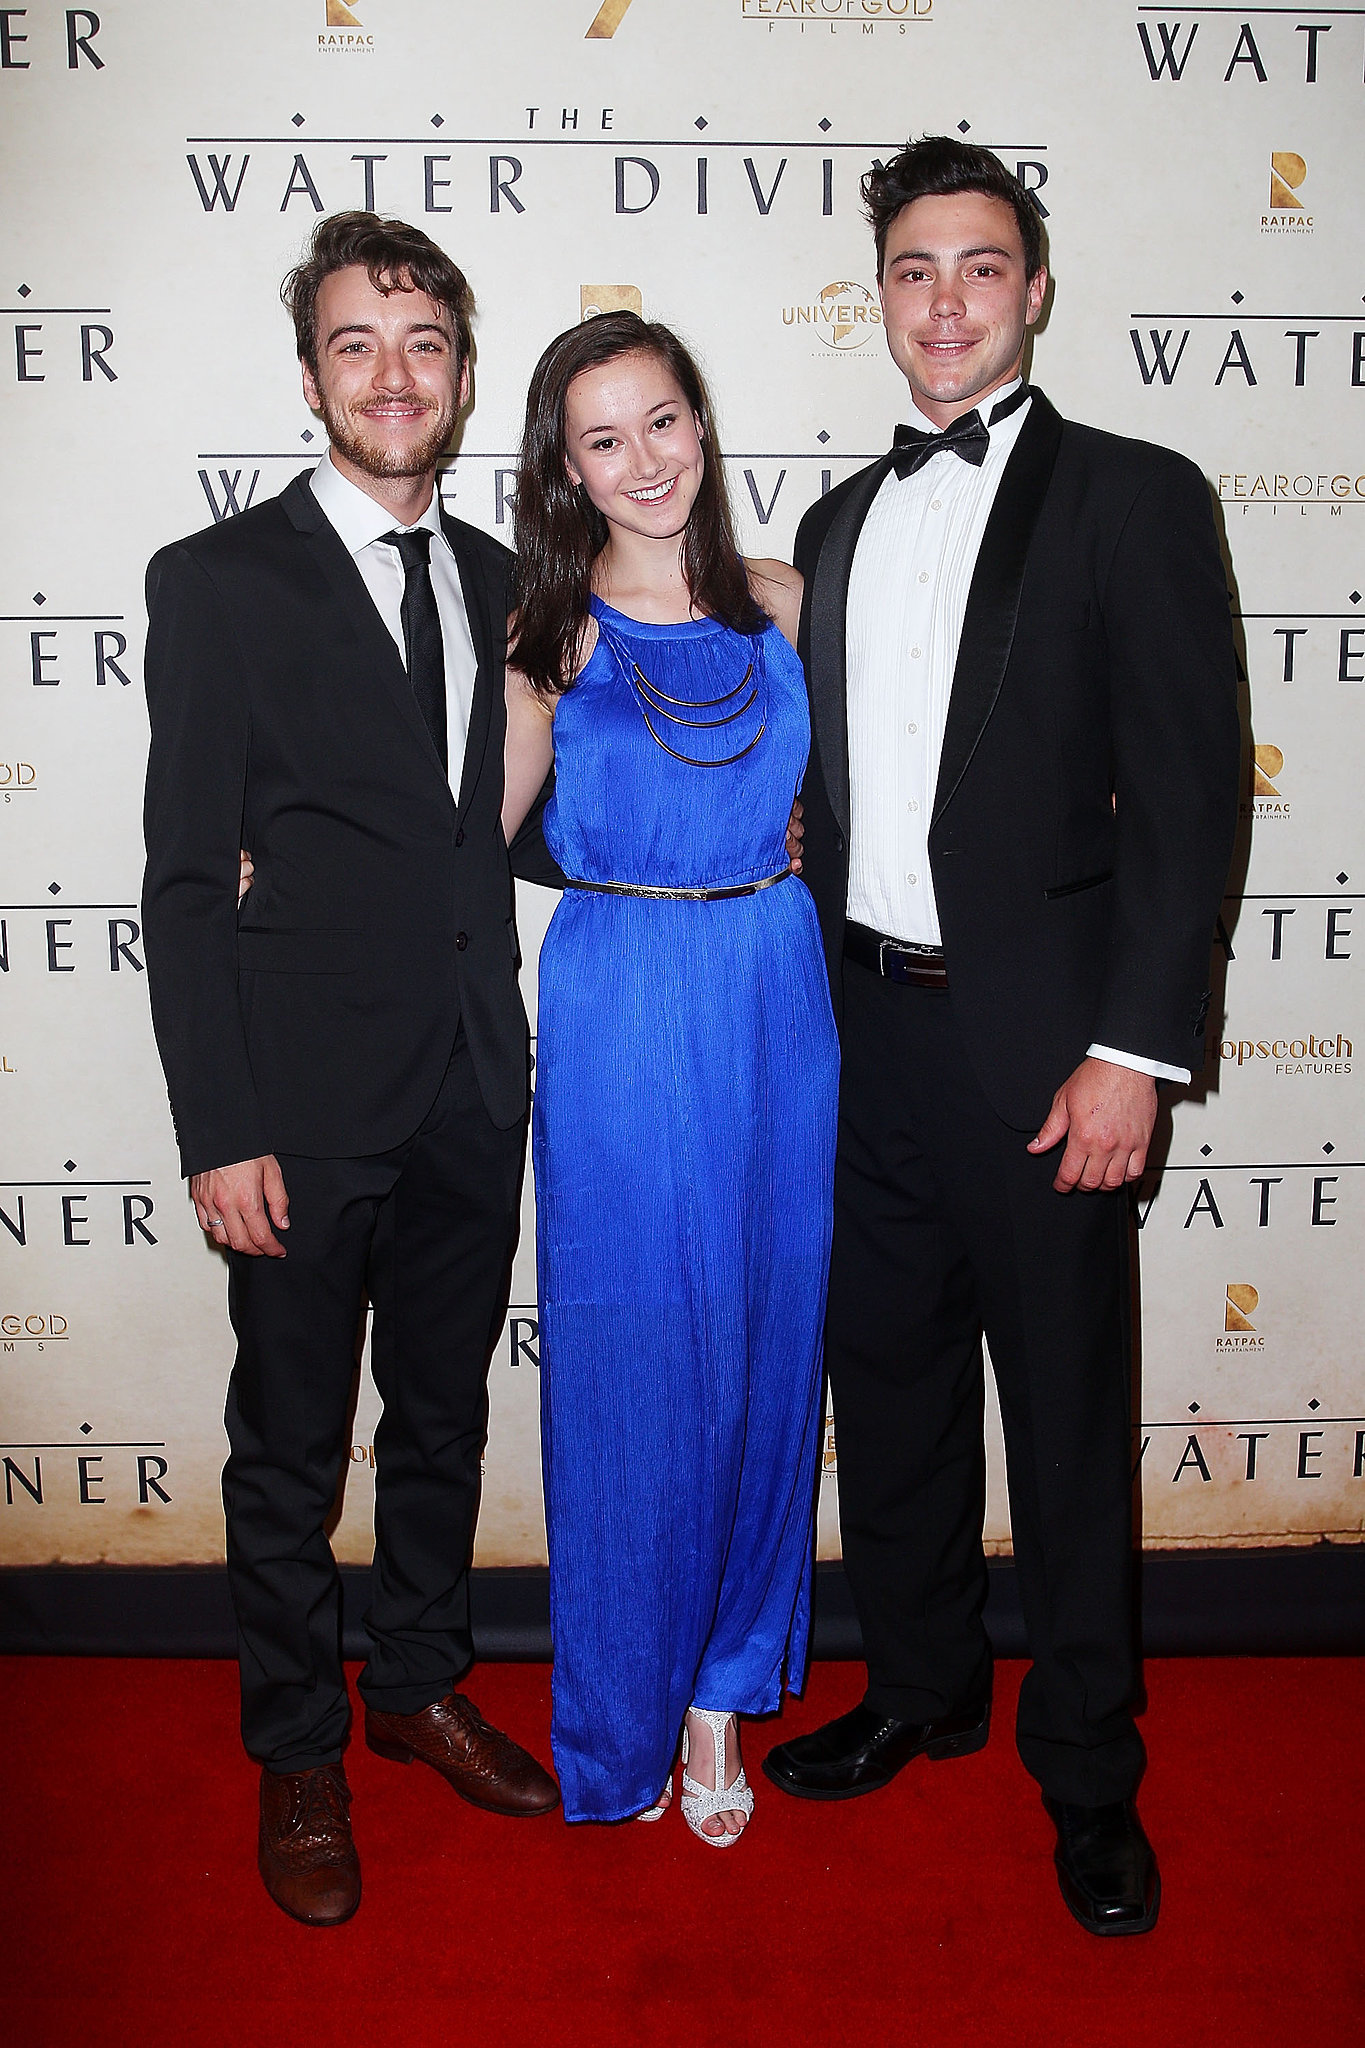 Dan Berini, Holly Fraser and Matthew O'Toole The Water Diviner Premiere Sydney 2 December, 2014